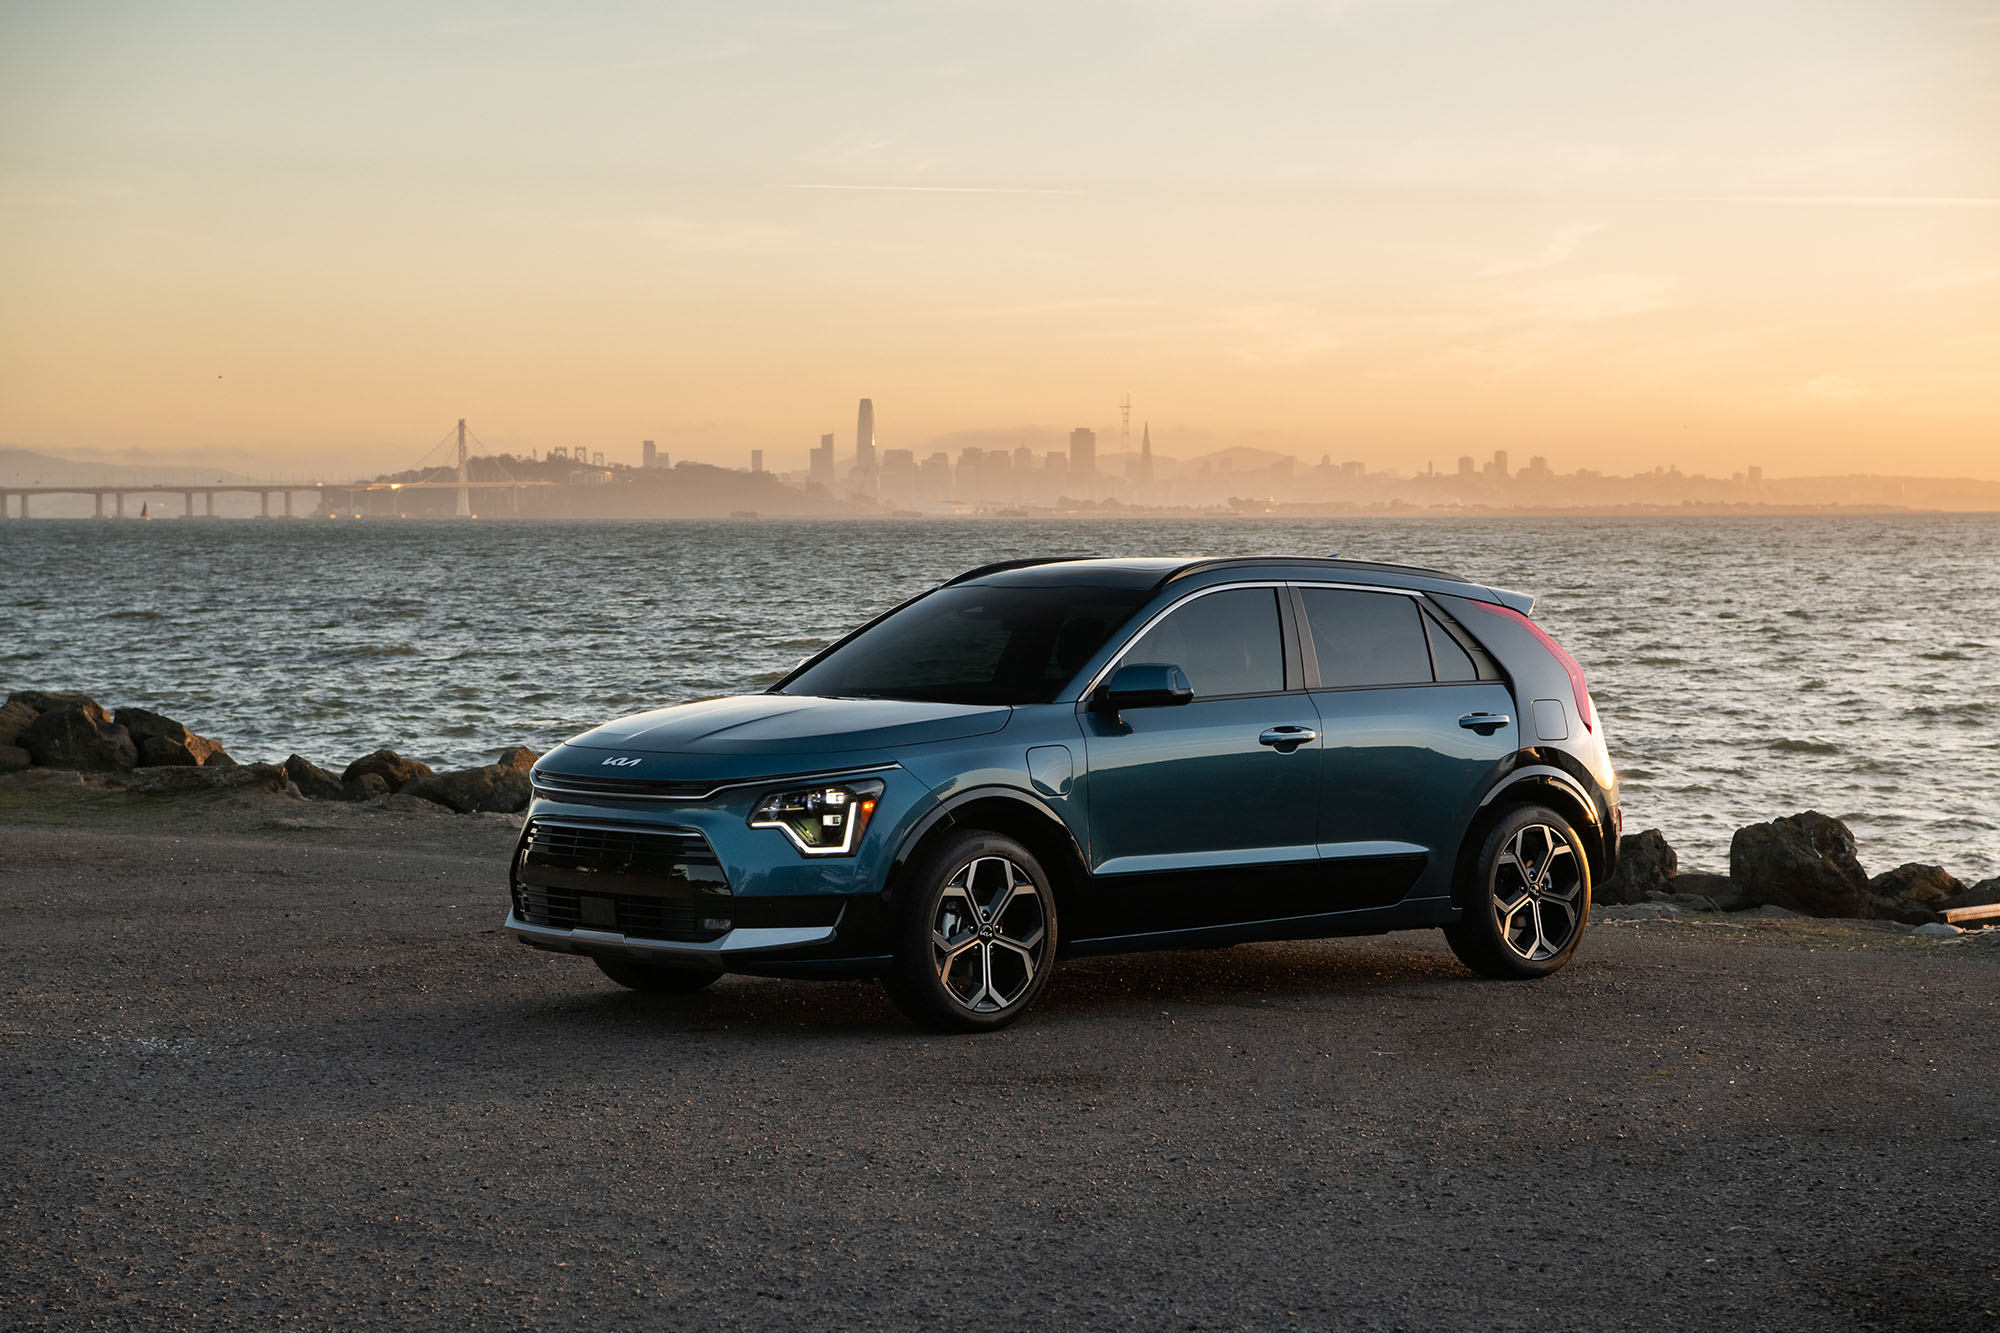 2023 Kia Niro PHEV in blue parked in front of the San Francisco Bay.